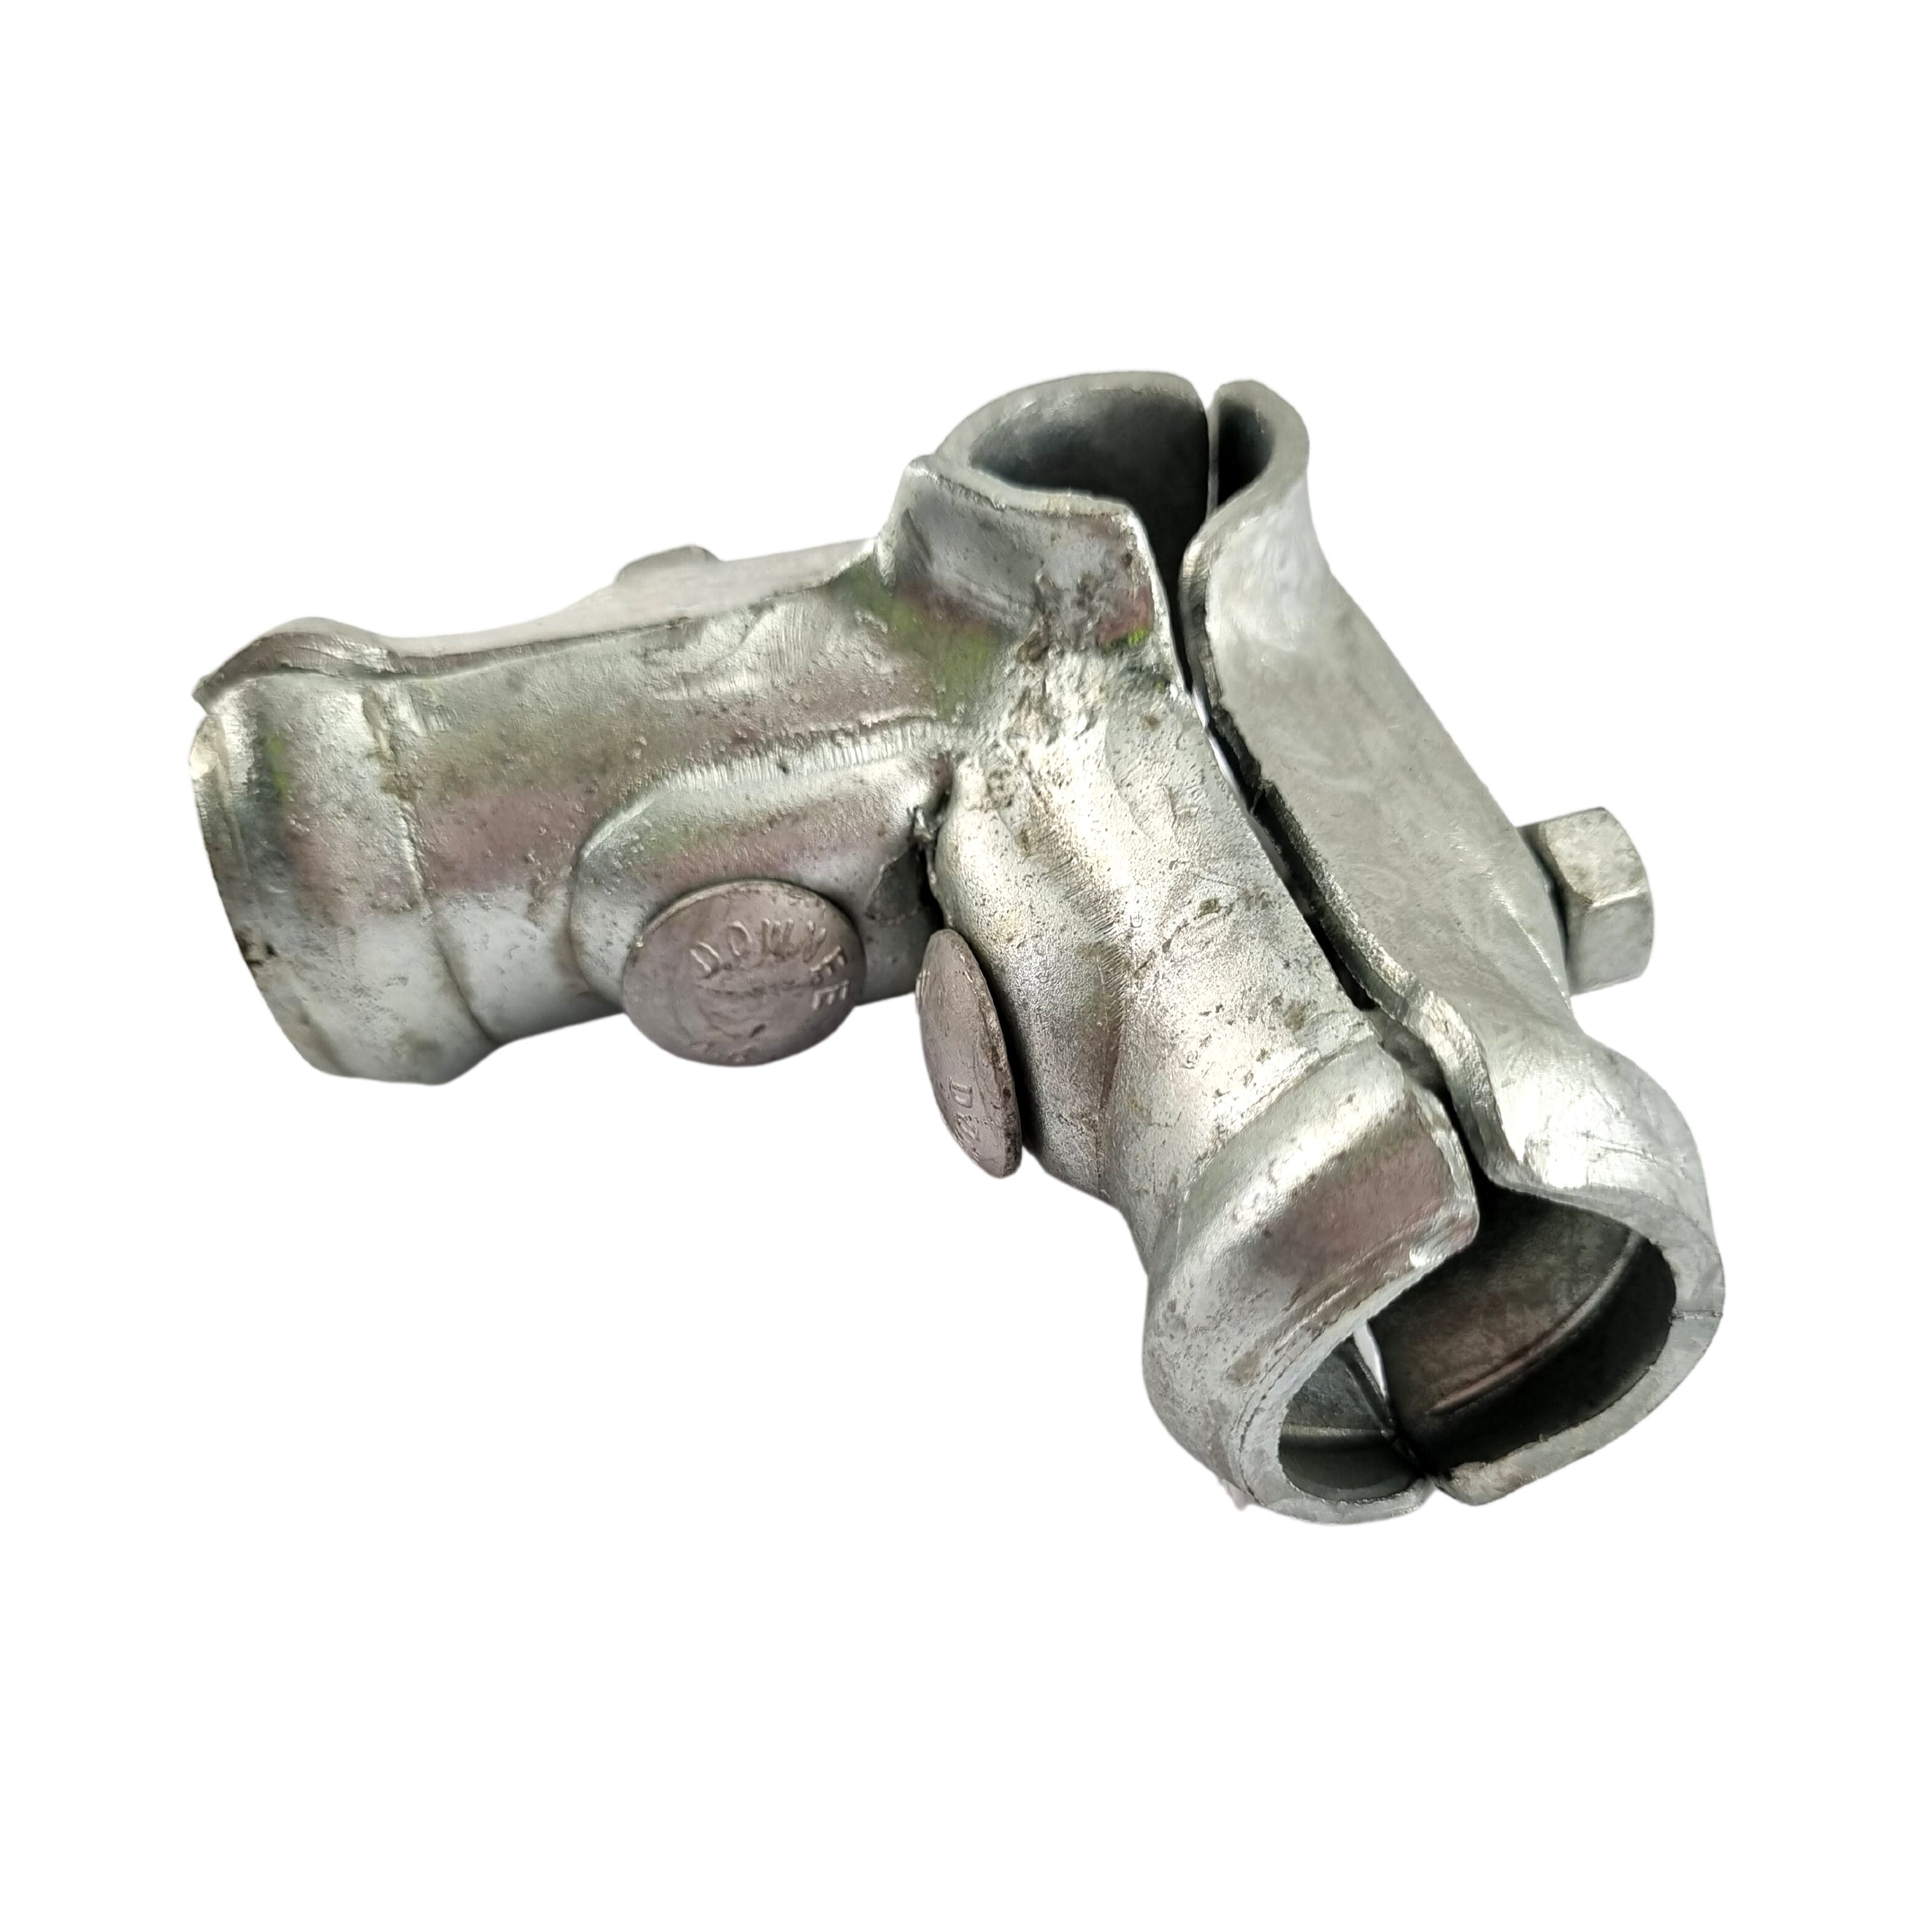 Corner Pipe Fitting in a galvanised finish, Australian made. Various sizes: from C2020 - 20/20 to C5050 - 50/50. Australia wide shipping. Shop online chain.com.au.